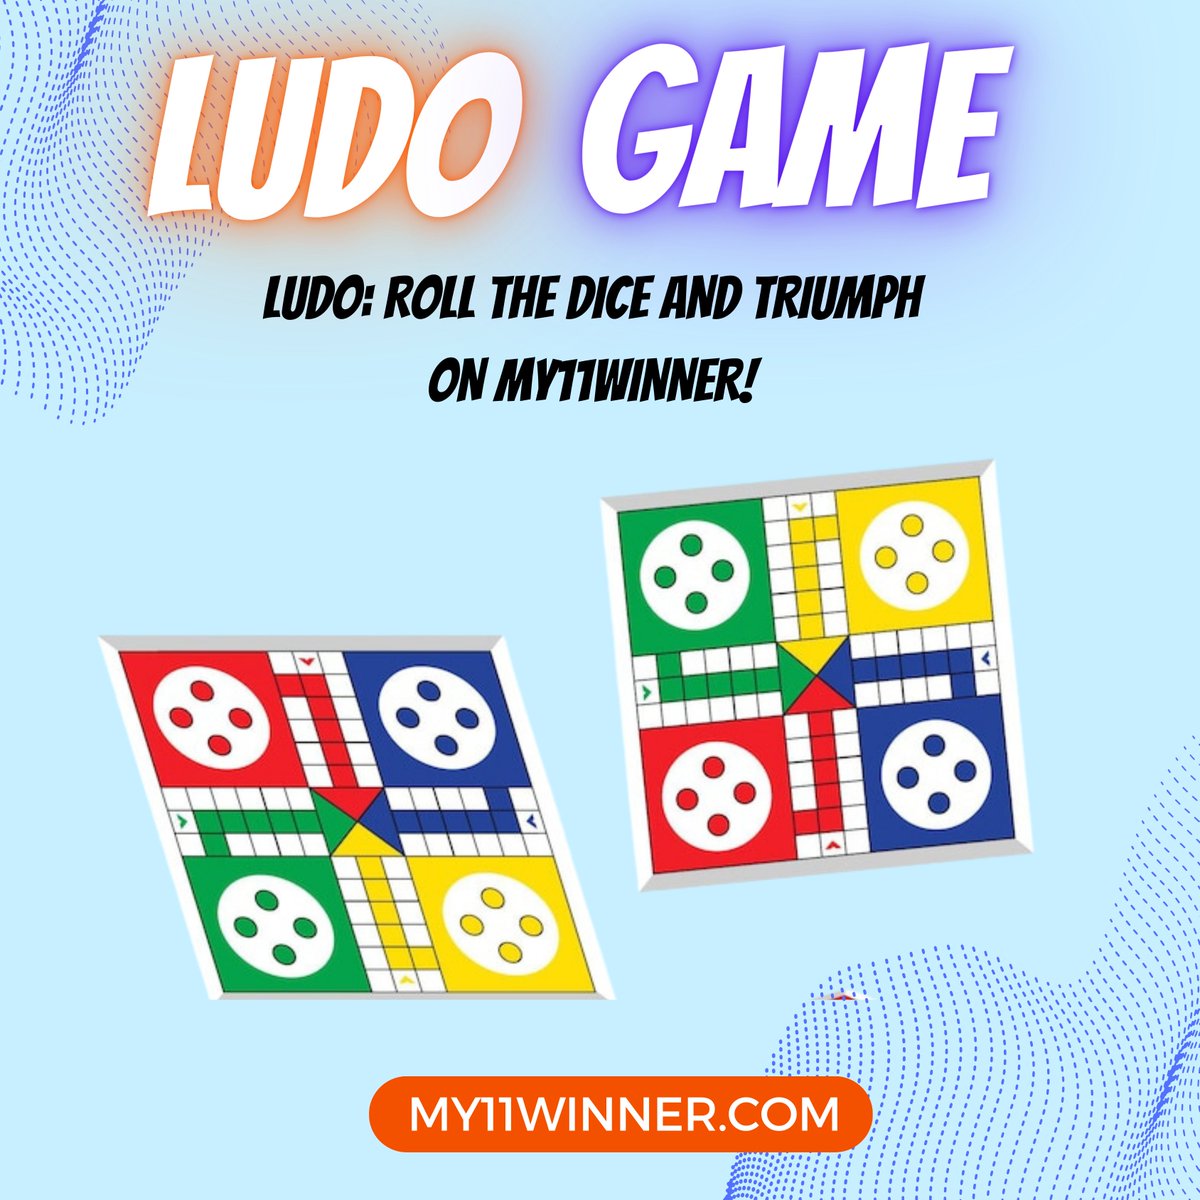 Embrace the Ludo Mania with My11Winner: Ludo Mania!
#My11Winner #LudoMania #LudoGame #OnlineLudo #PlayAndWin #RealTimeMultiplayer #DownloadNow #LudoChampion #LudoFrenzy #JoinTheFun